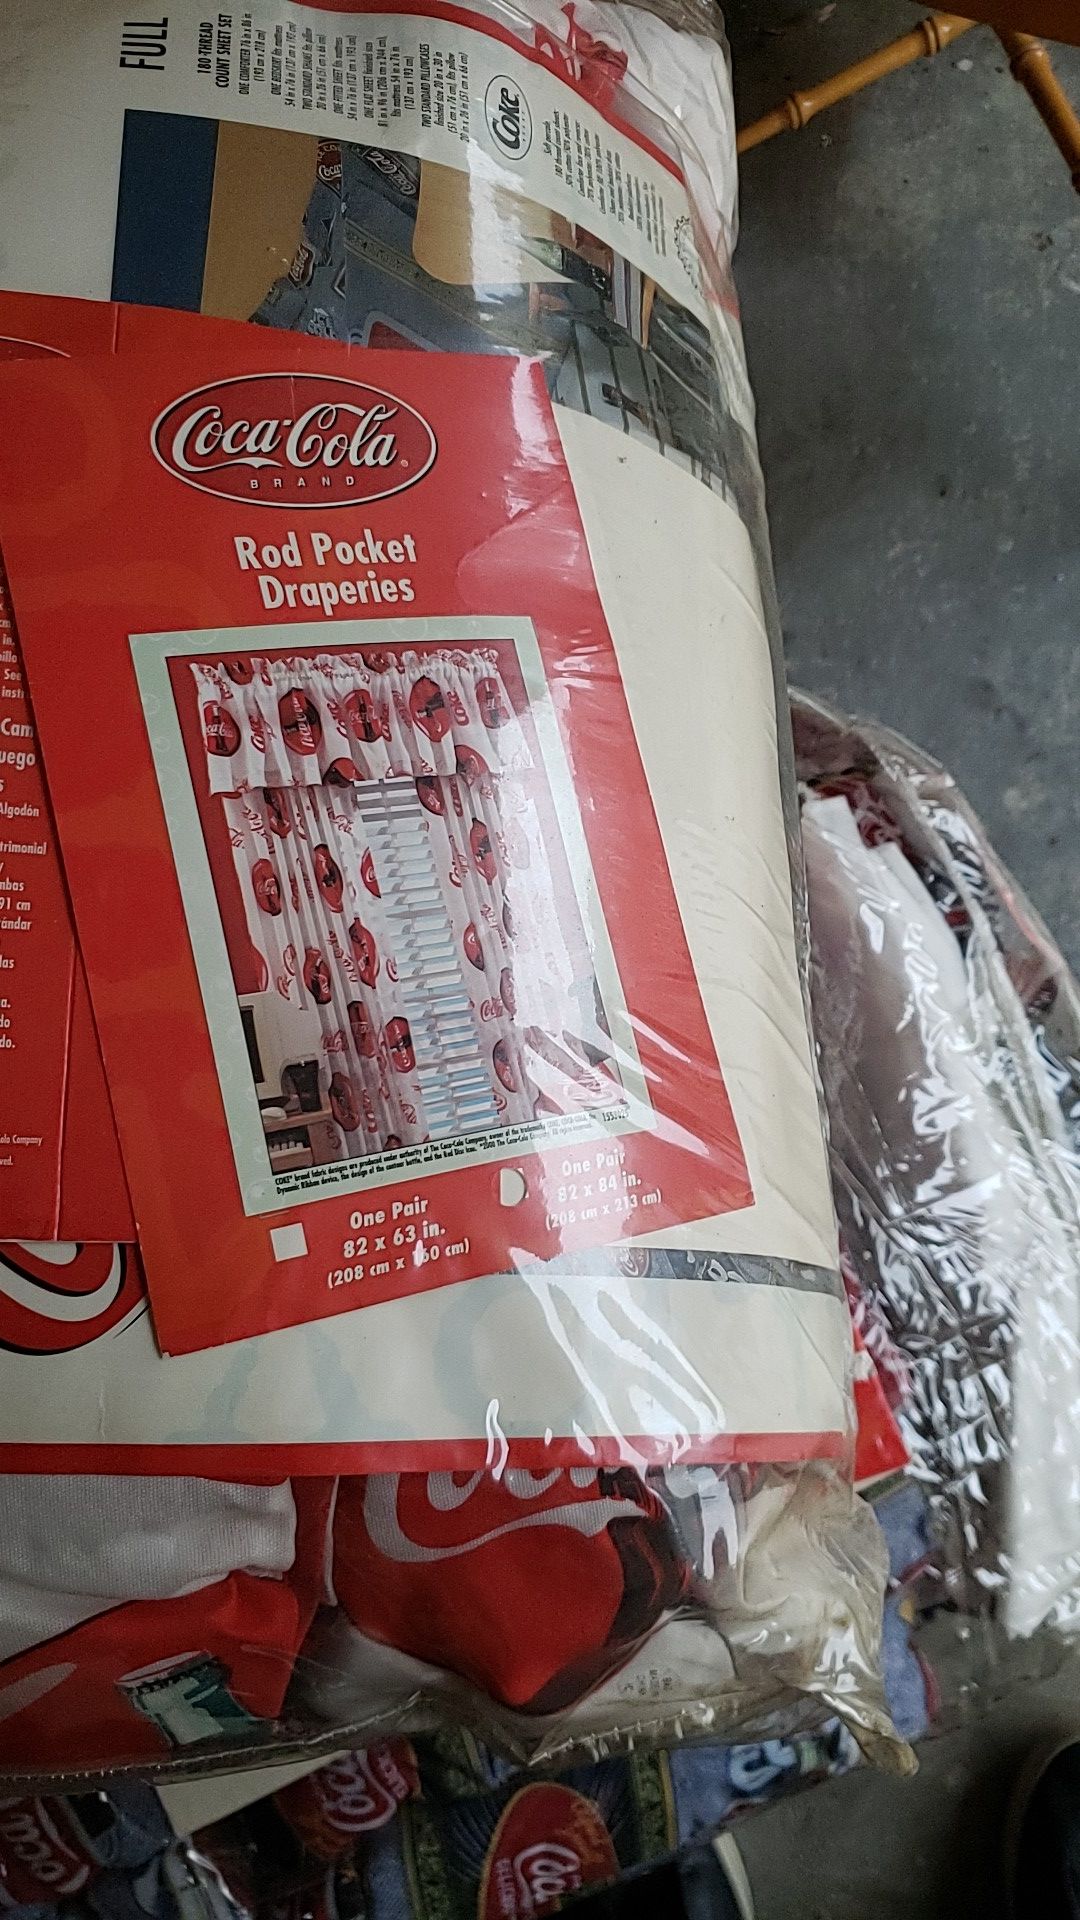 Coca cola comforter. Drapes and ceiling fan